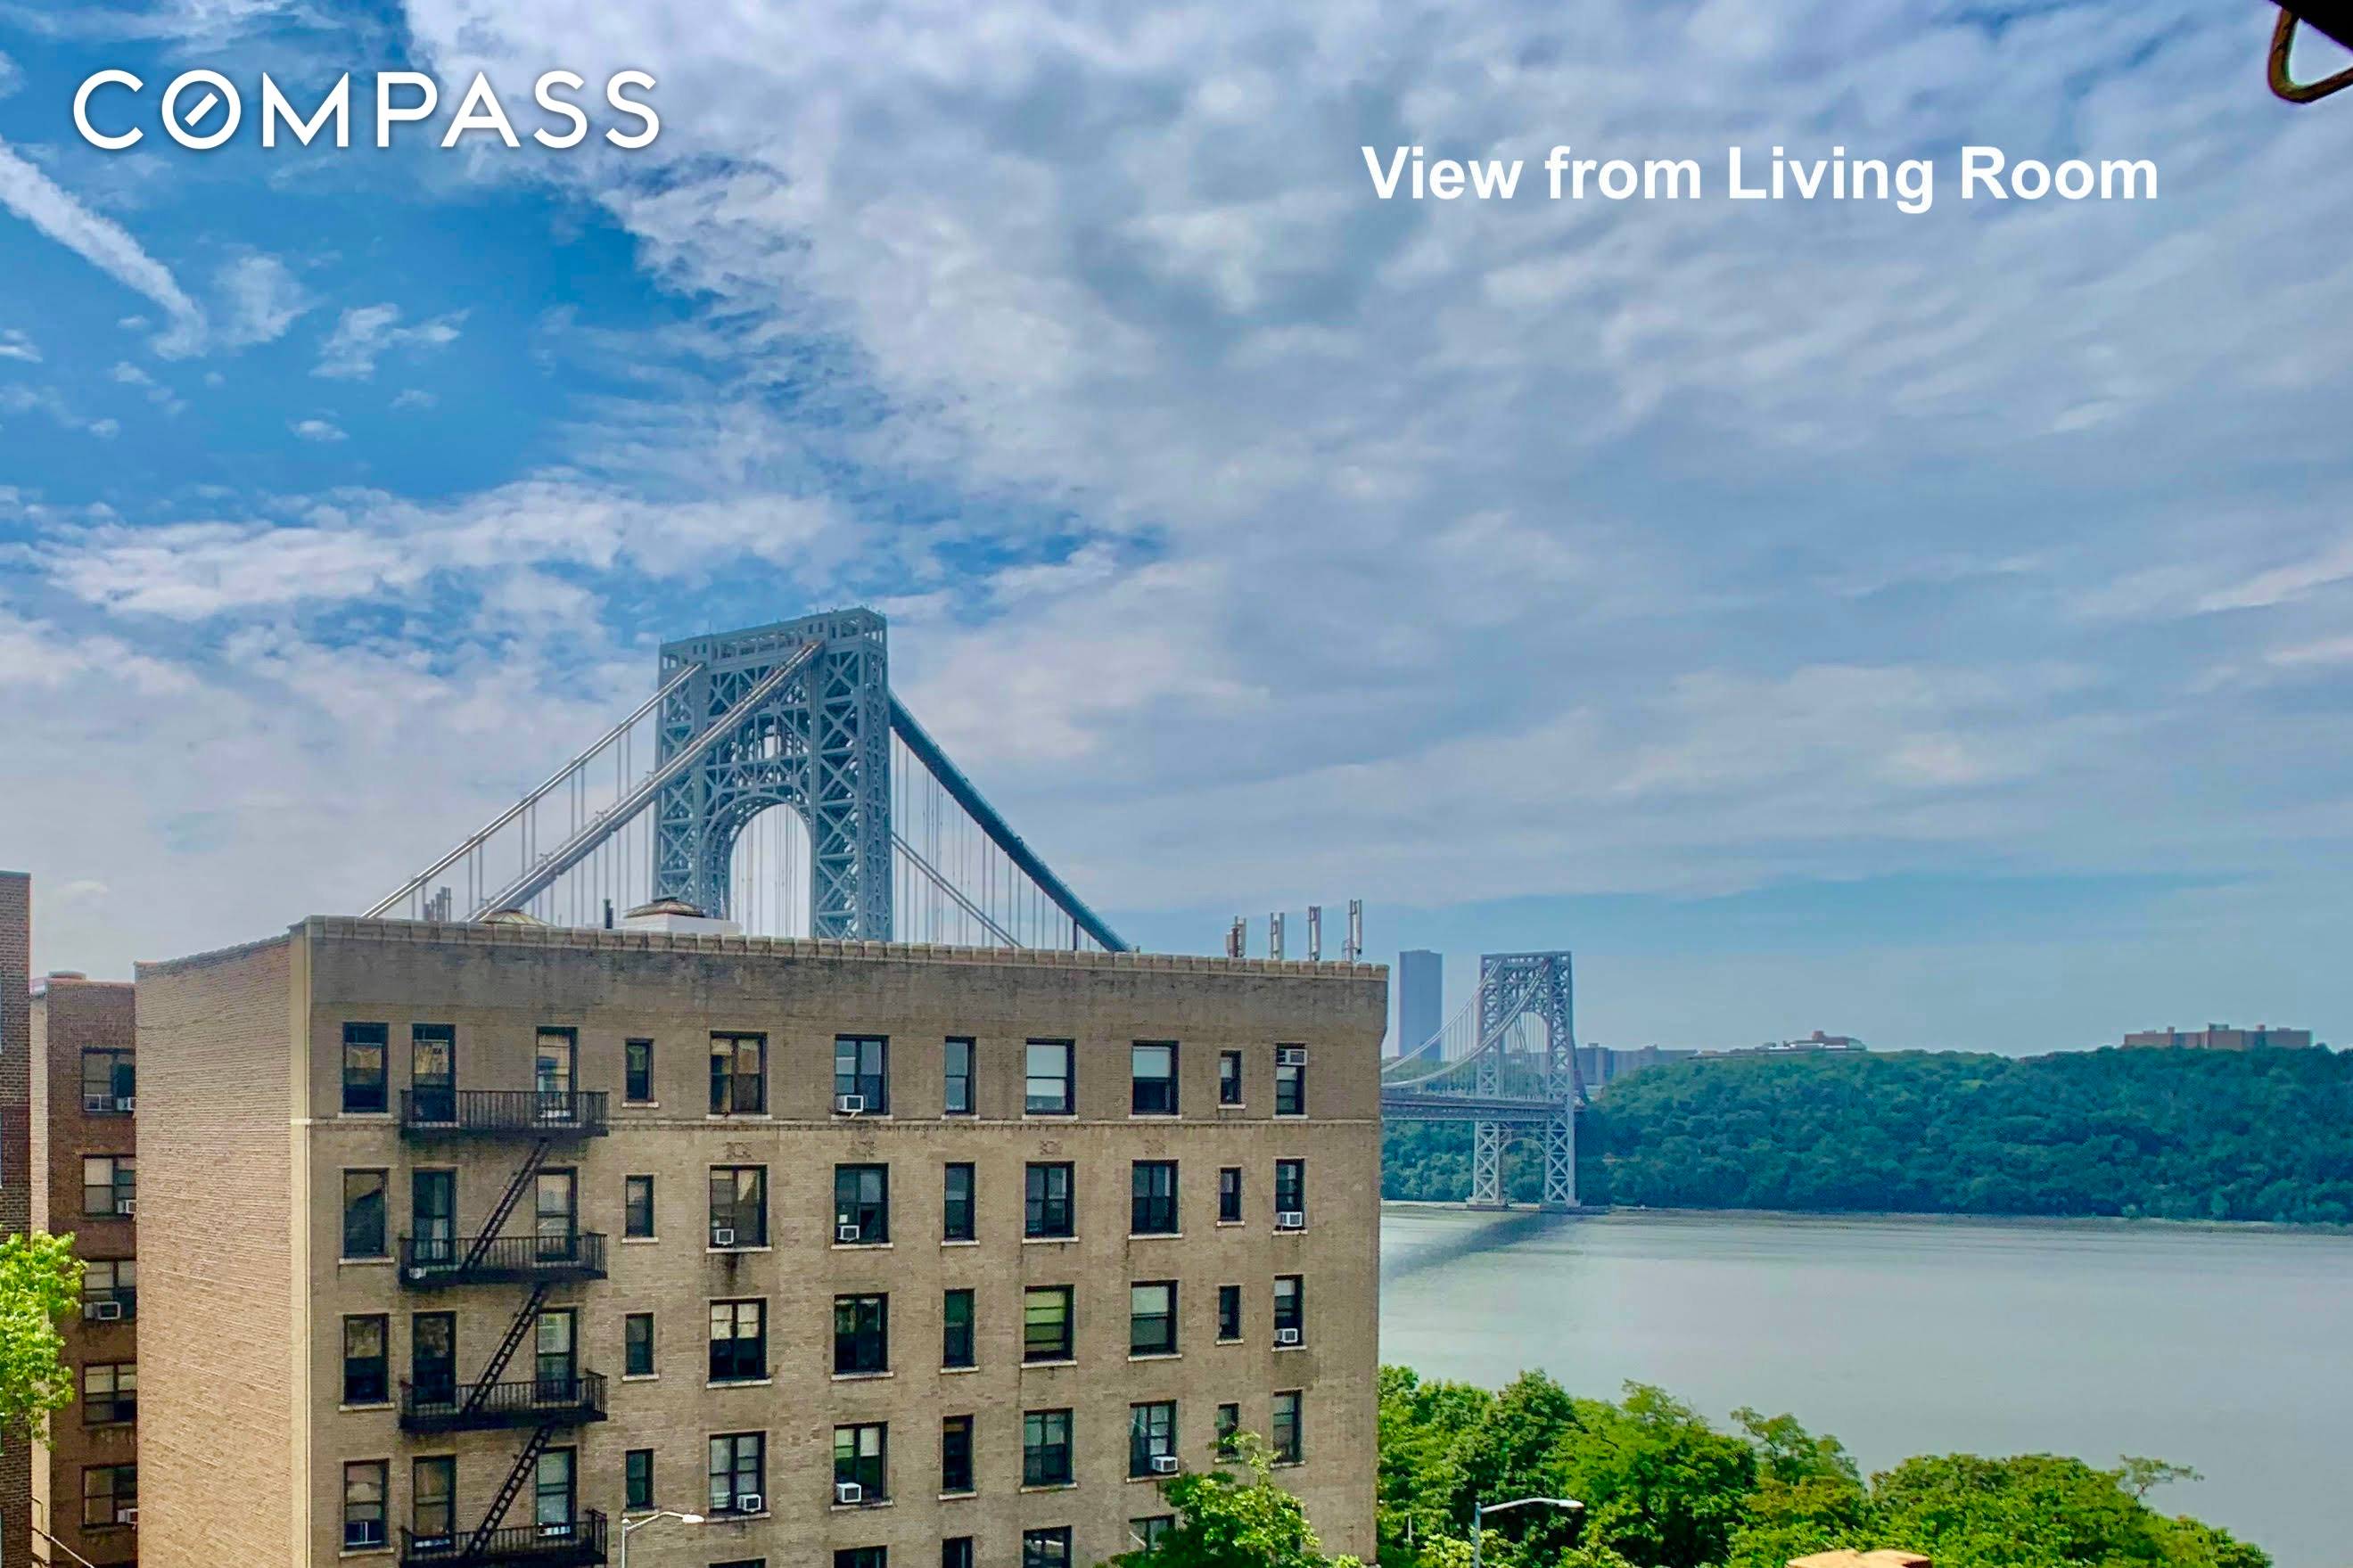 GORGEOUS FLEX 2 BEDROOM WITH PARTIAL RIVER AND GWB VIEWS Loaded with charm, sunlight and open southern views, you ll delight in having ample, flexible space to live comfortably as ...